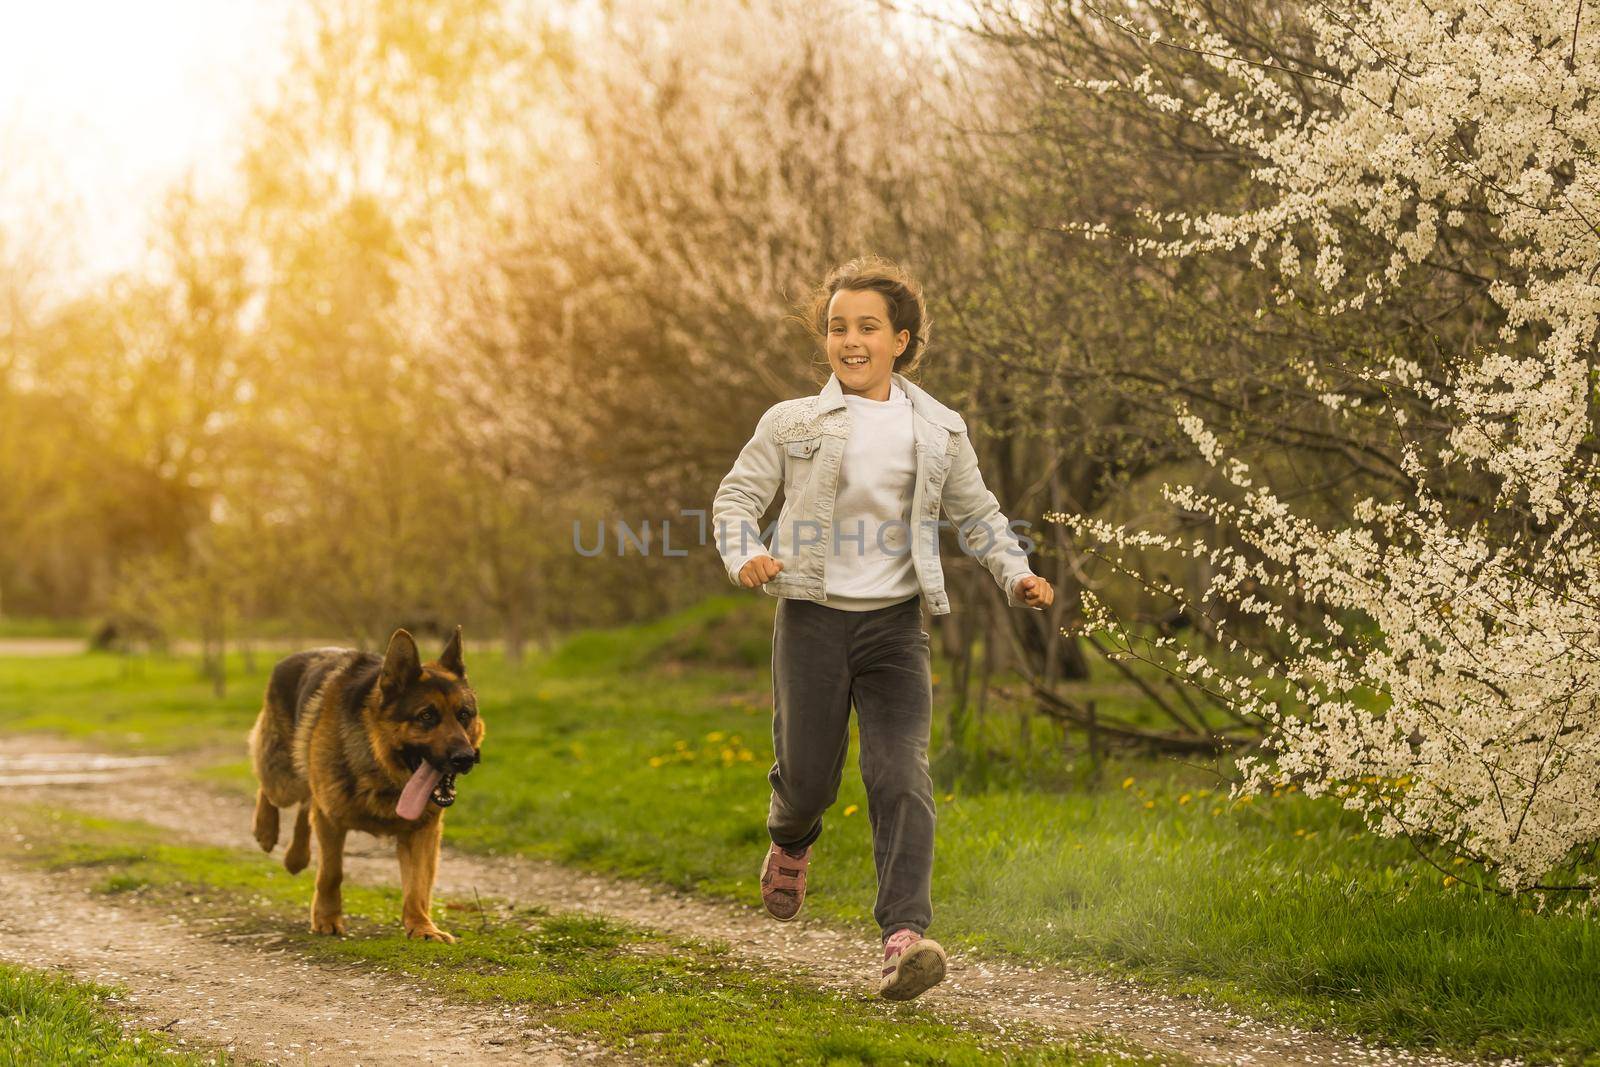 little girl running with a dog in a flower garden by Andelov13